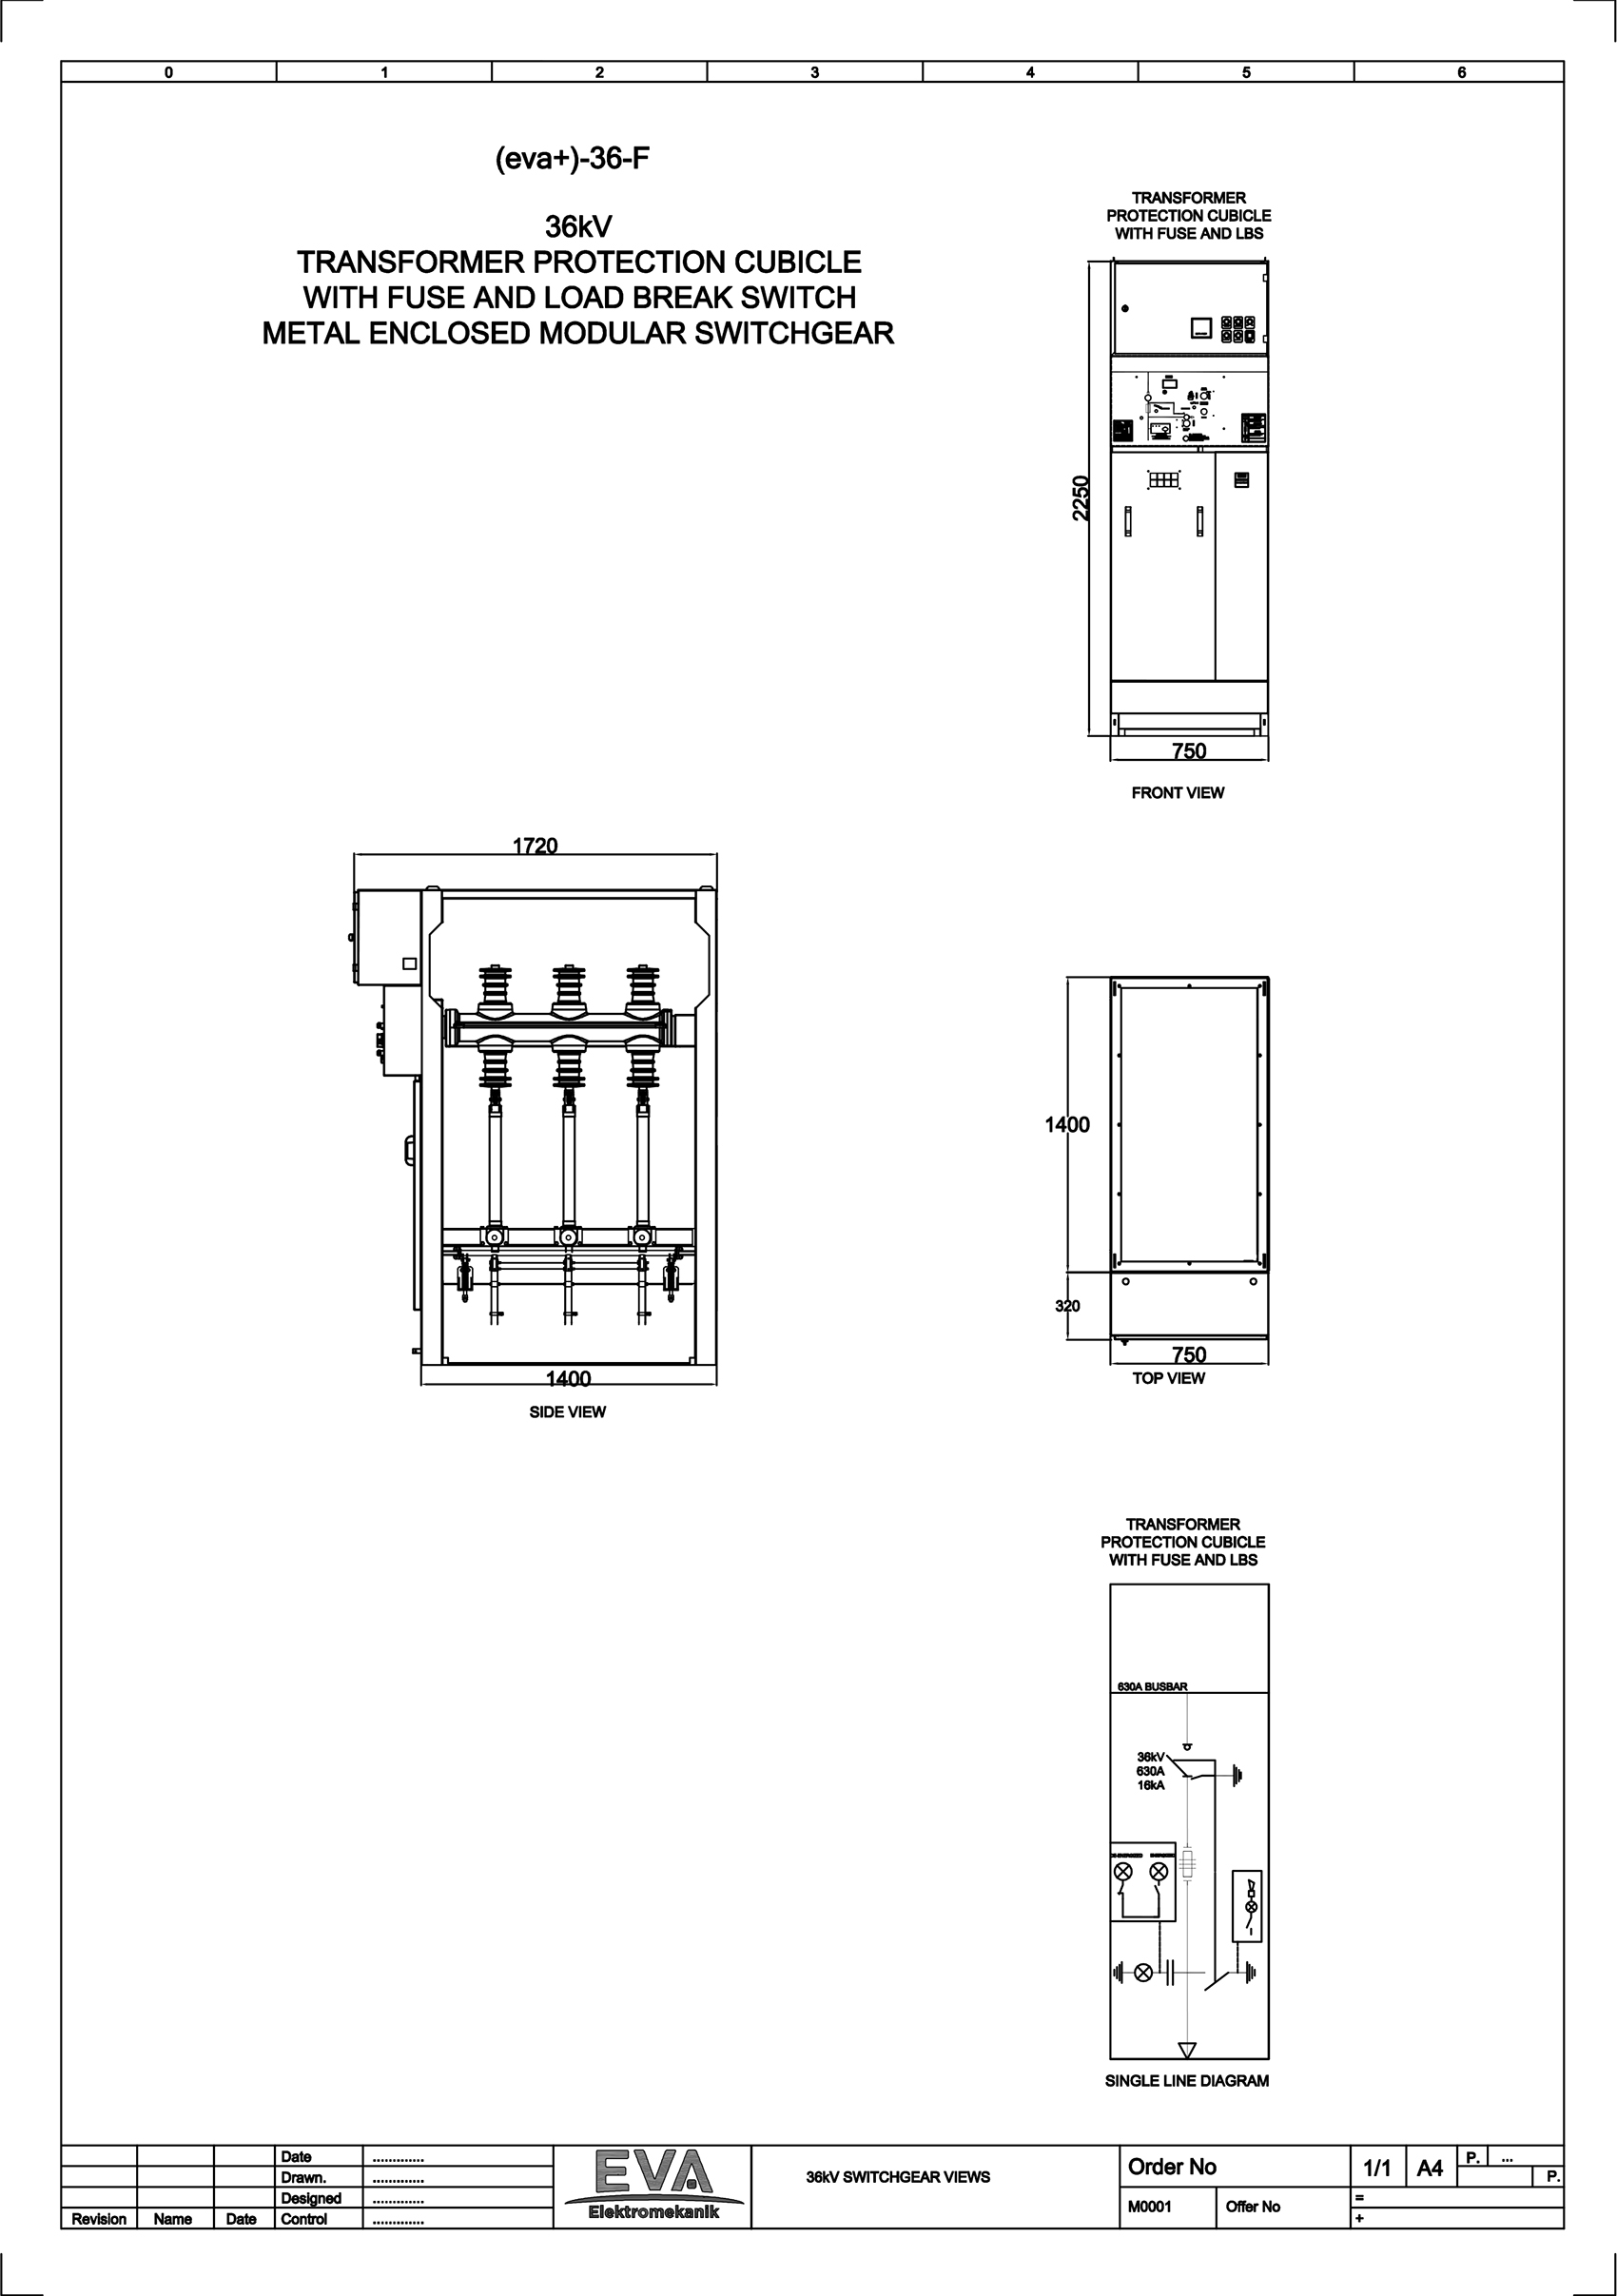 Transformer Protection Cubicle with Fuse and Load Break Switch (LBS)	